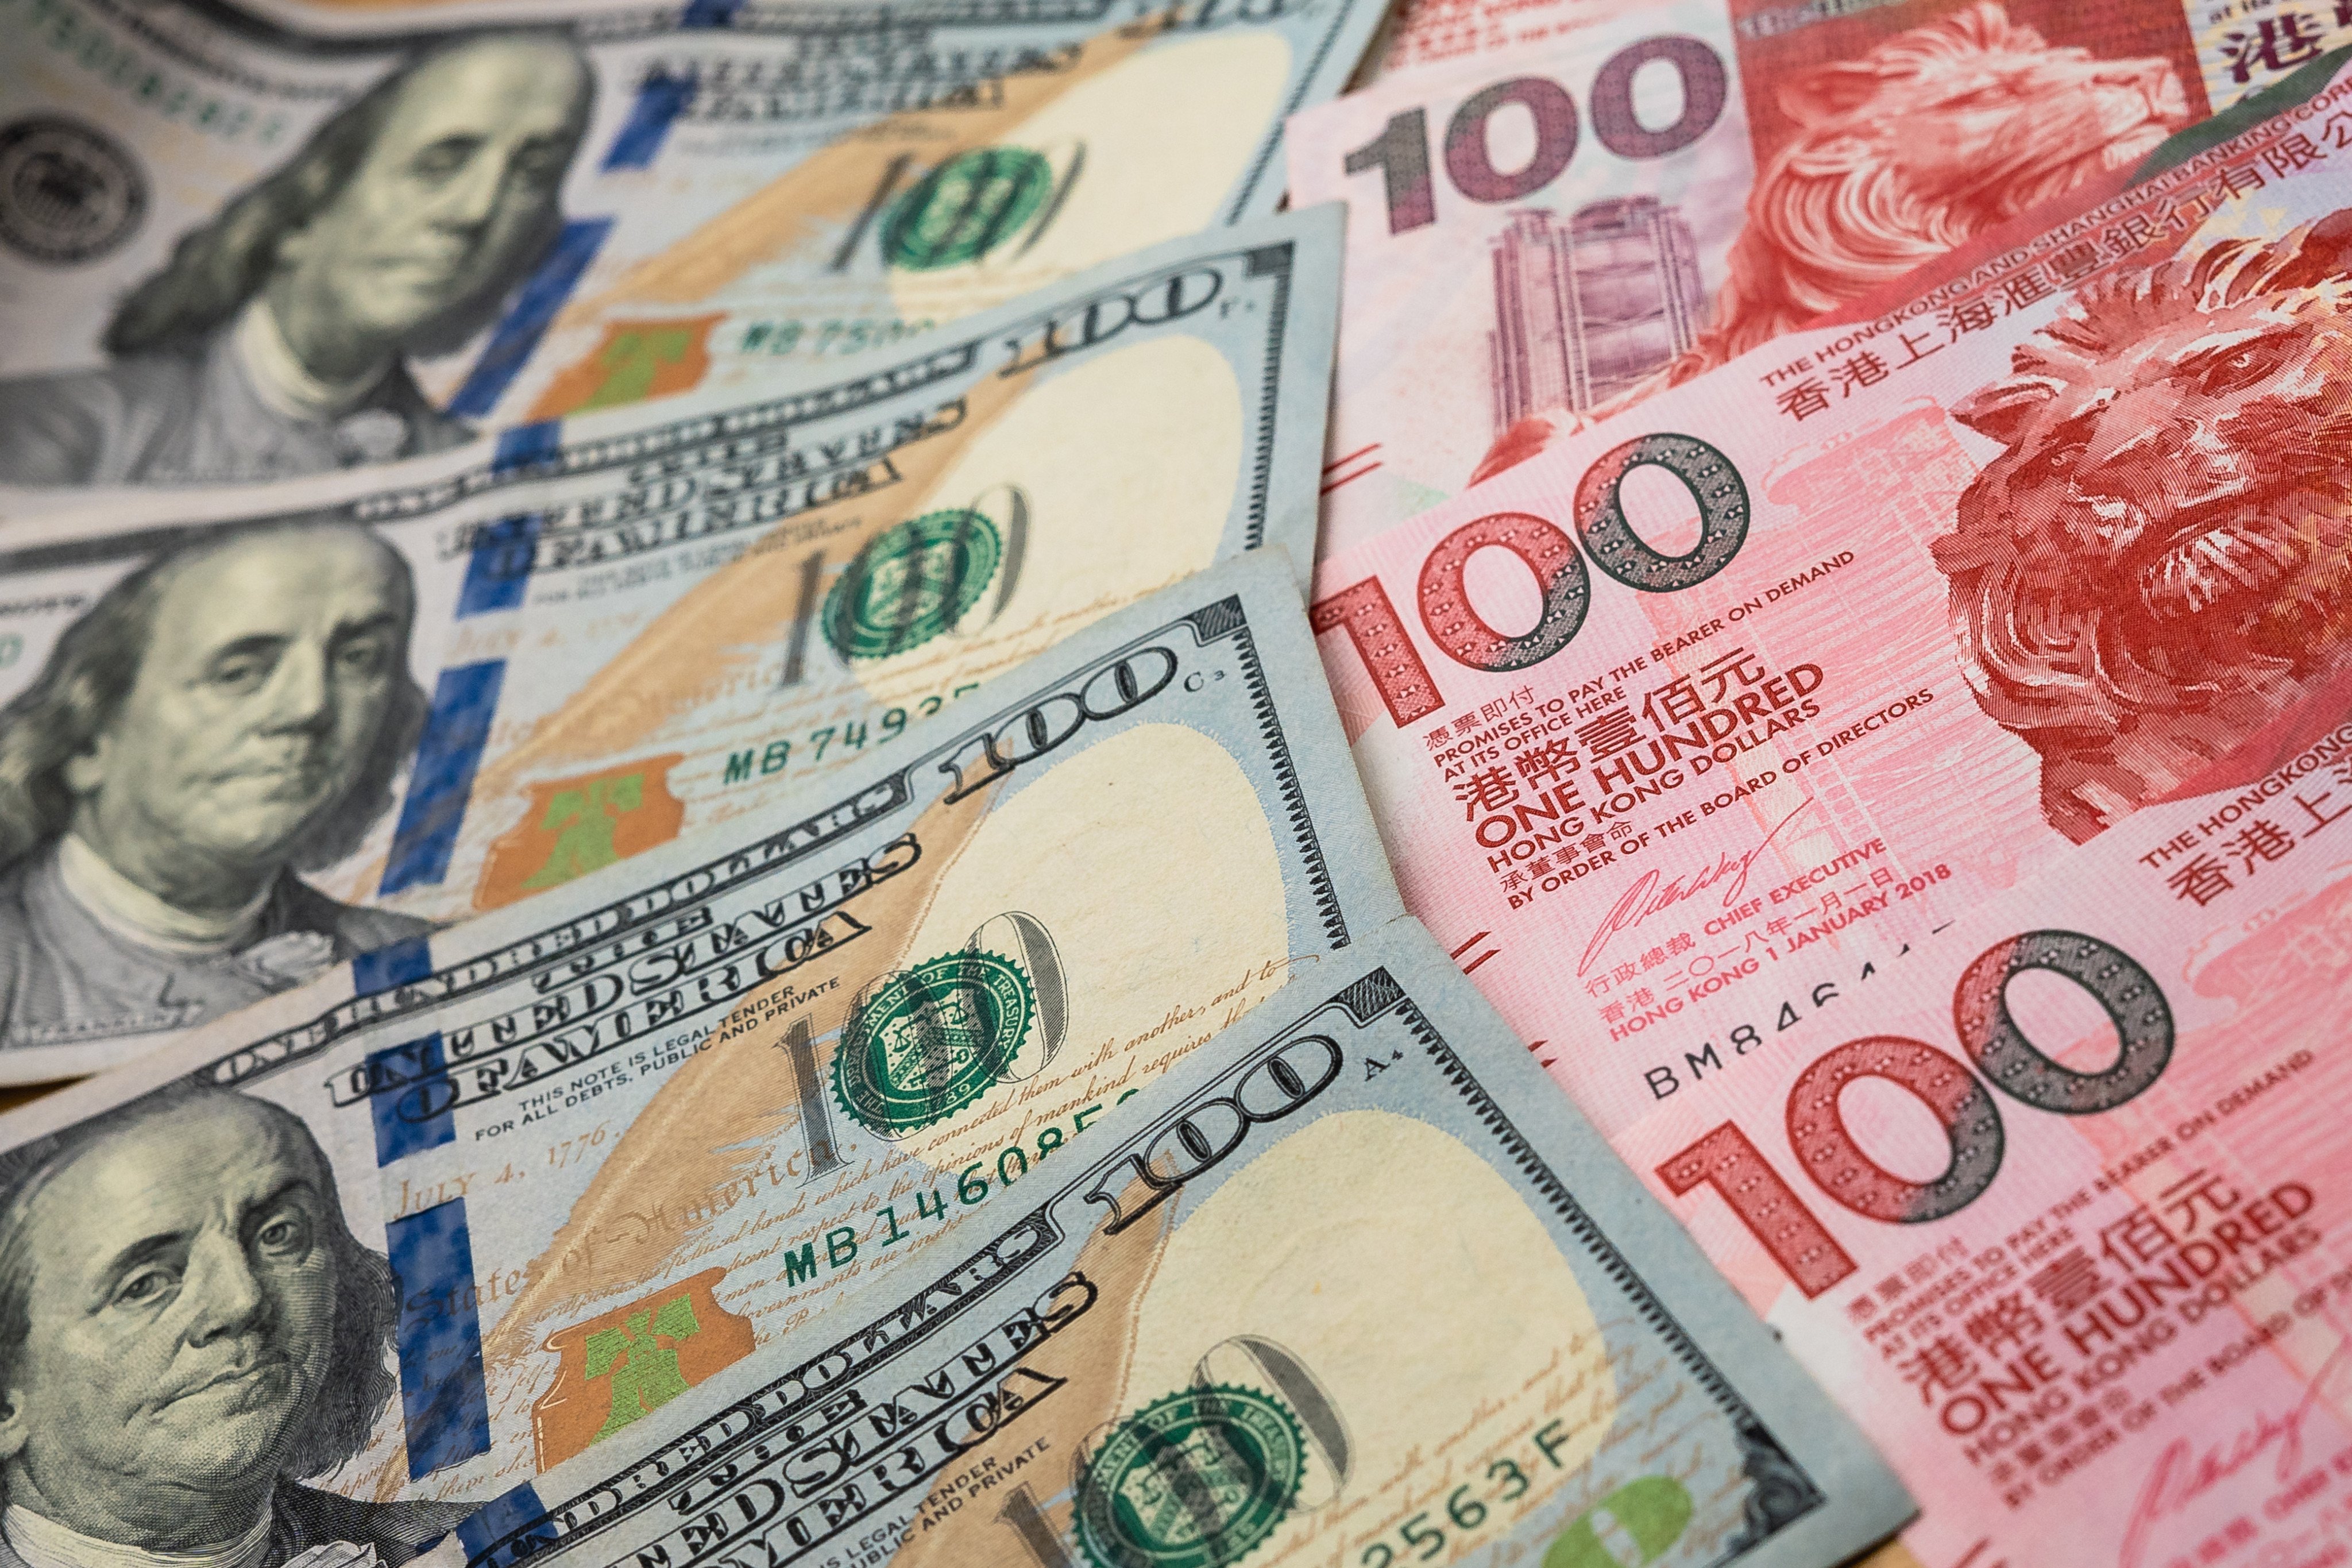 The Hong Kong dollar’s peg to the US dollar has come under pressure from international investors yet again, a strategy that has yet to succeed given the currency’s robust support at home. Photo: Shutterstock